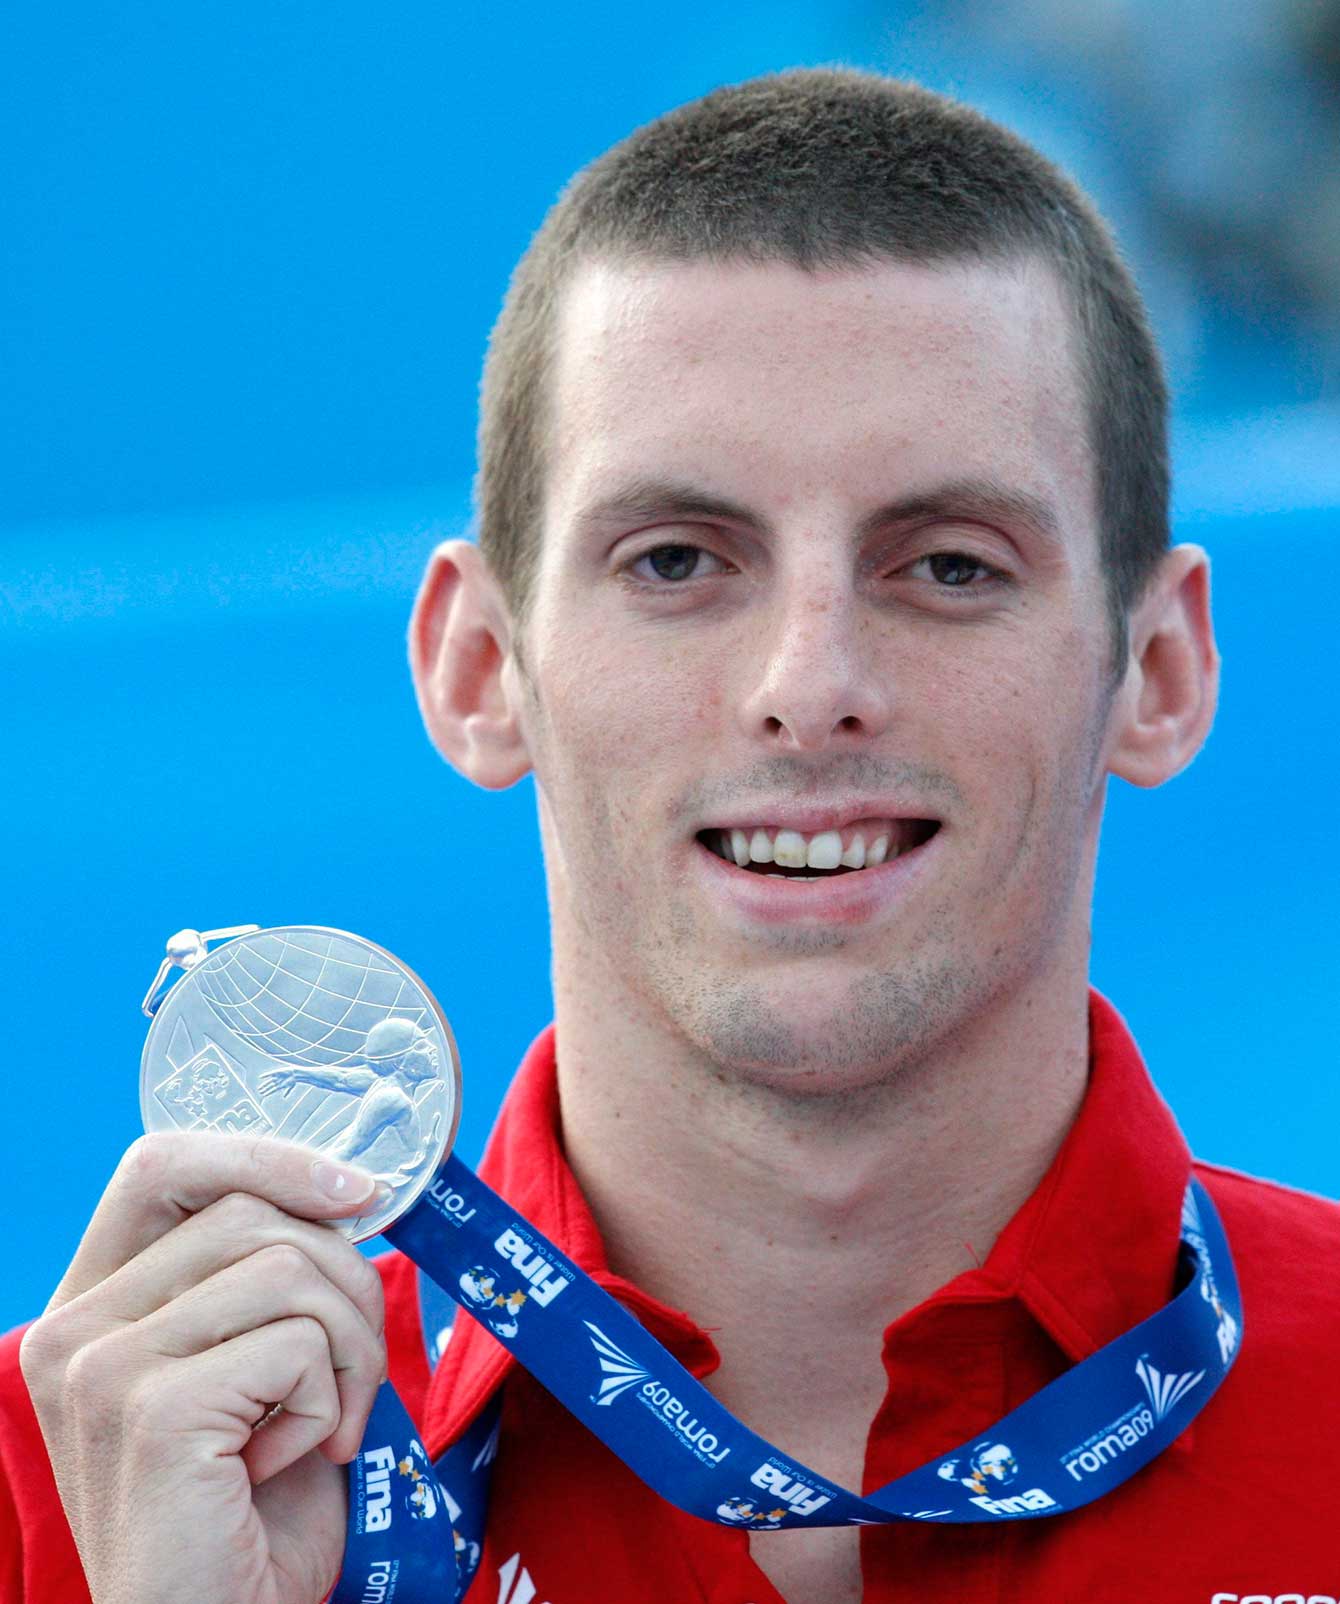 Ryan Cochrane won the first of three world championships silver medals at Rome in 2009.